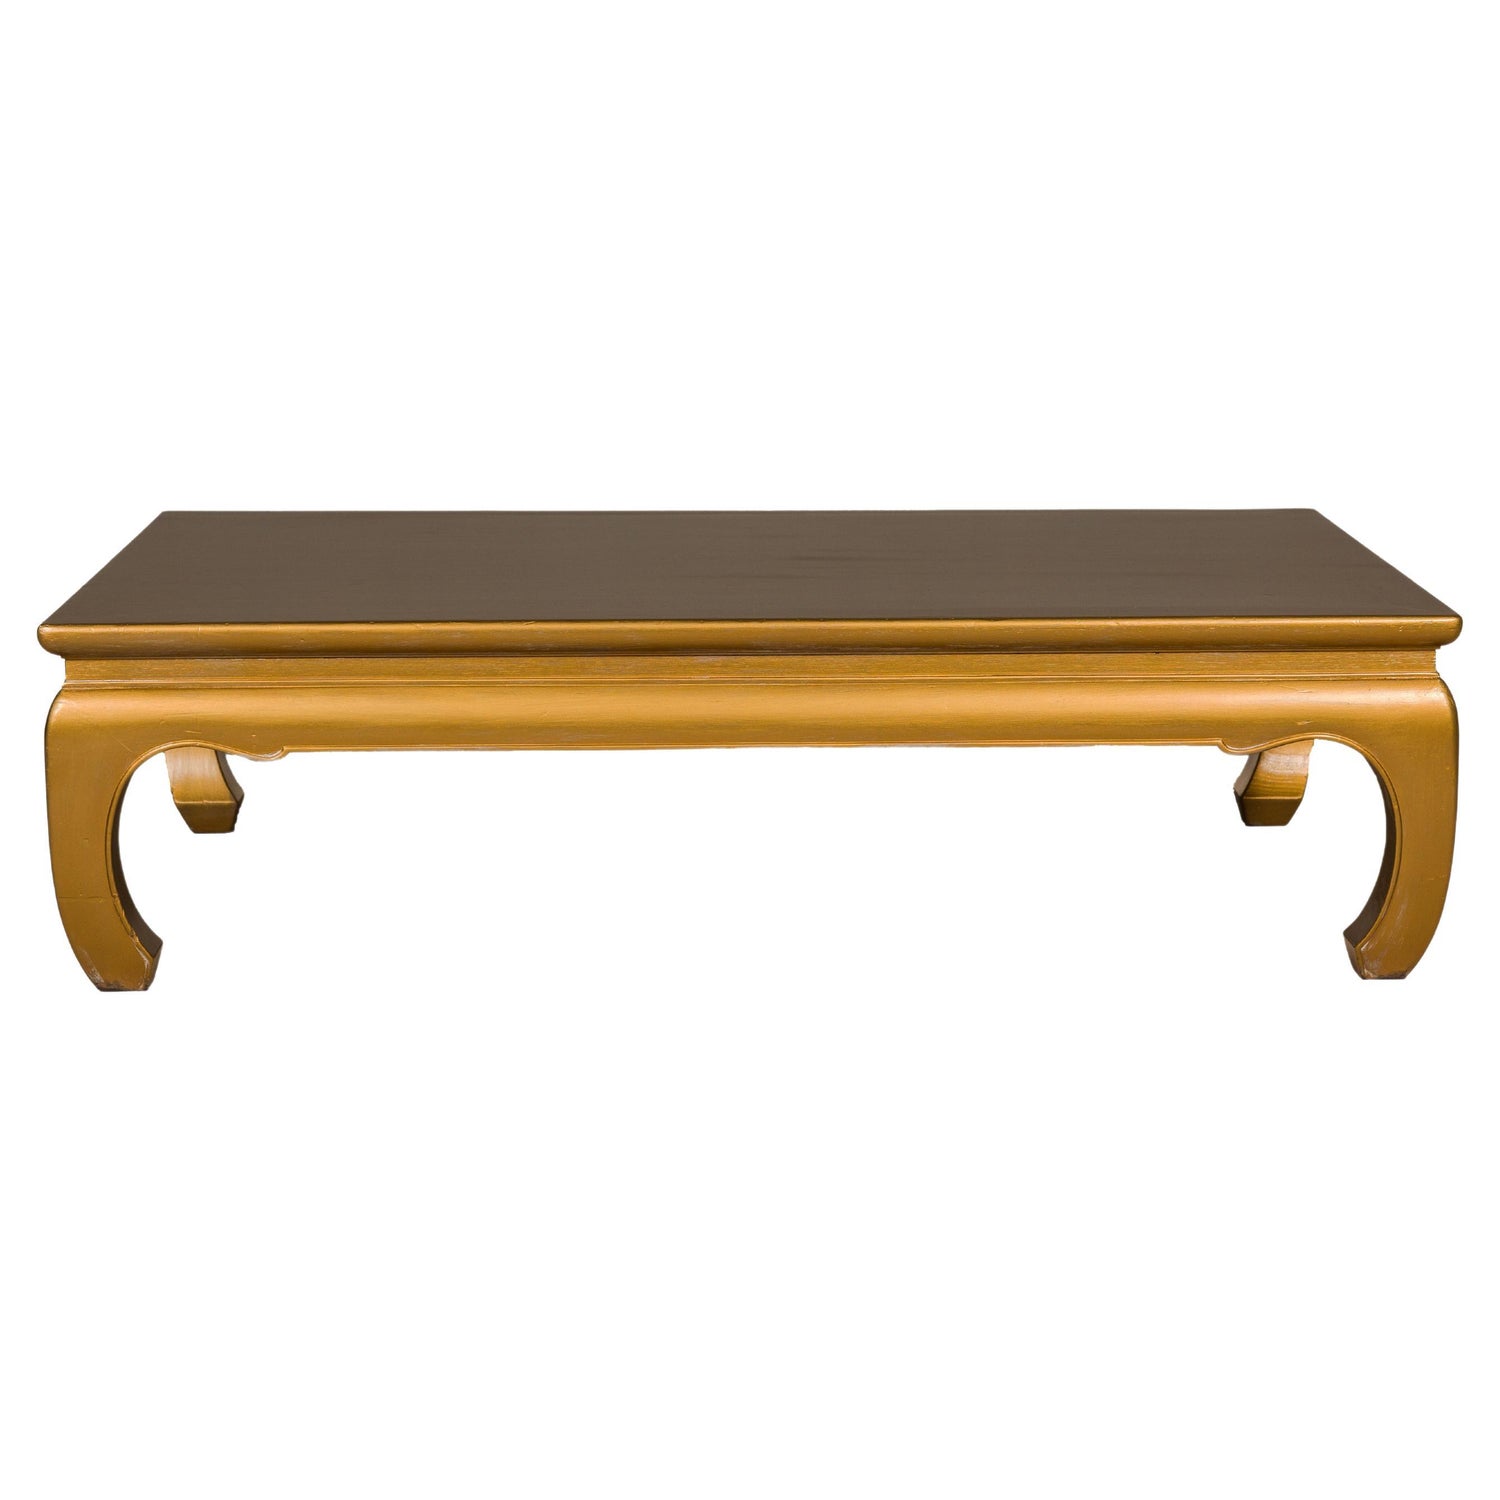 https://a.1stdibscdn.com/gold-lacquered-ming-dynasty-style-chow-leg-coffee-table-with-carved-apron-for-sale/f_8639/f_375031421702295204890/f_37503142_1702295205577_bg_processed.jpg?width=1500